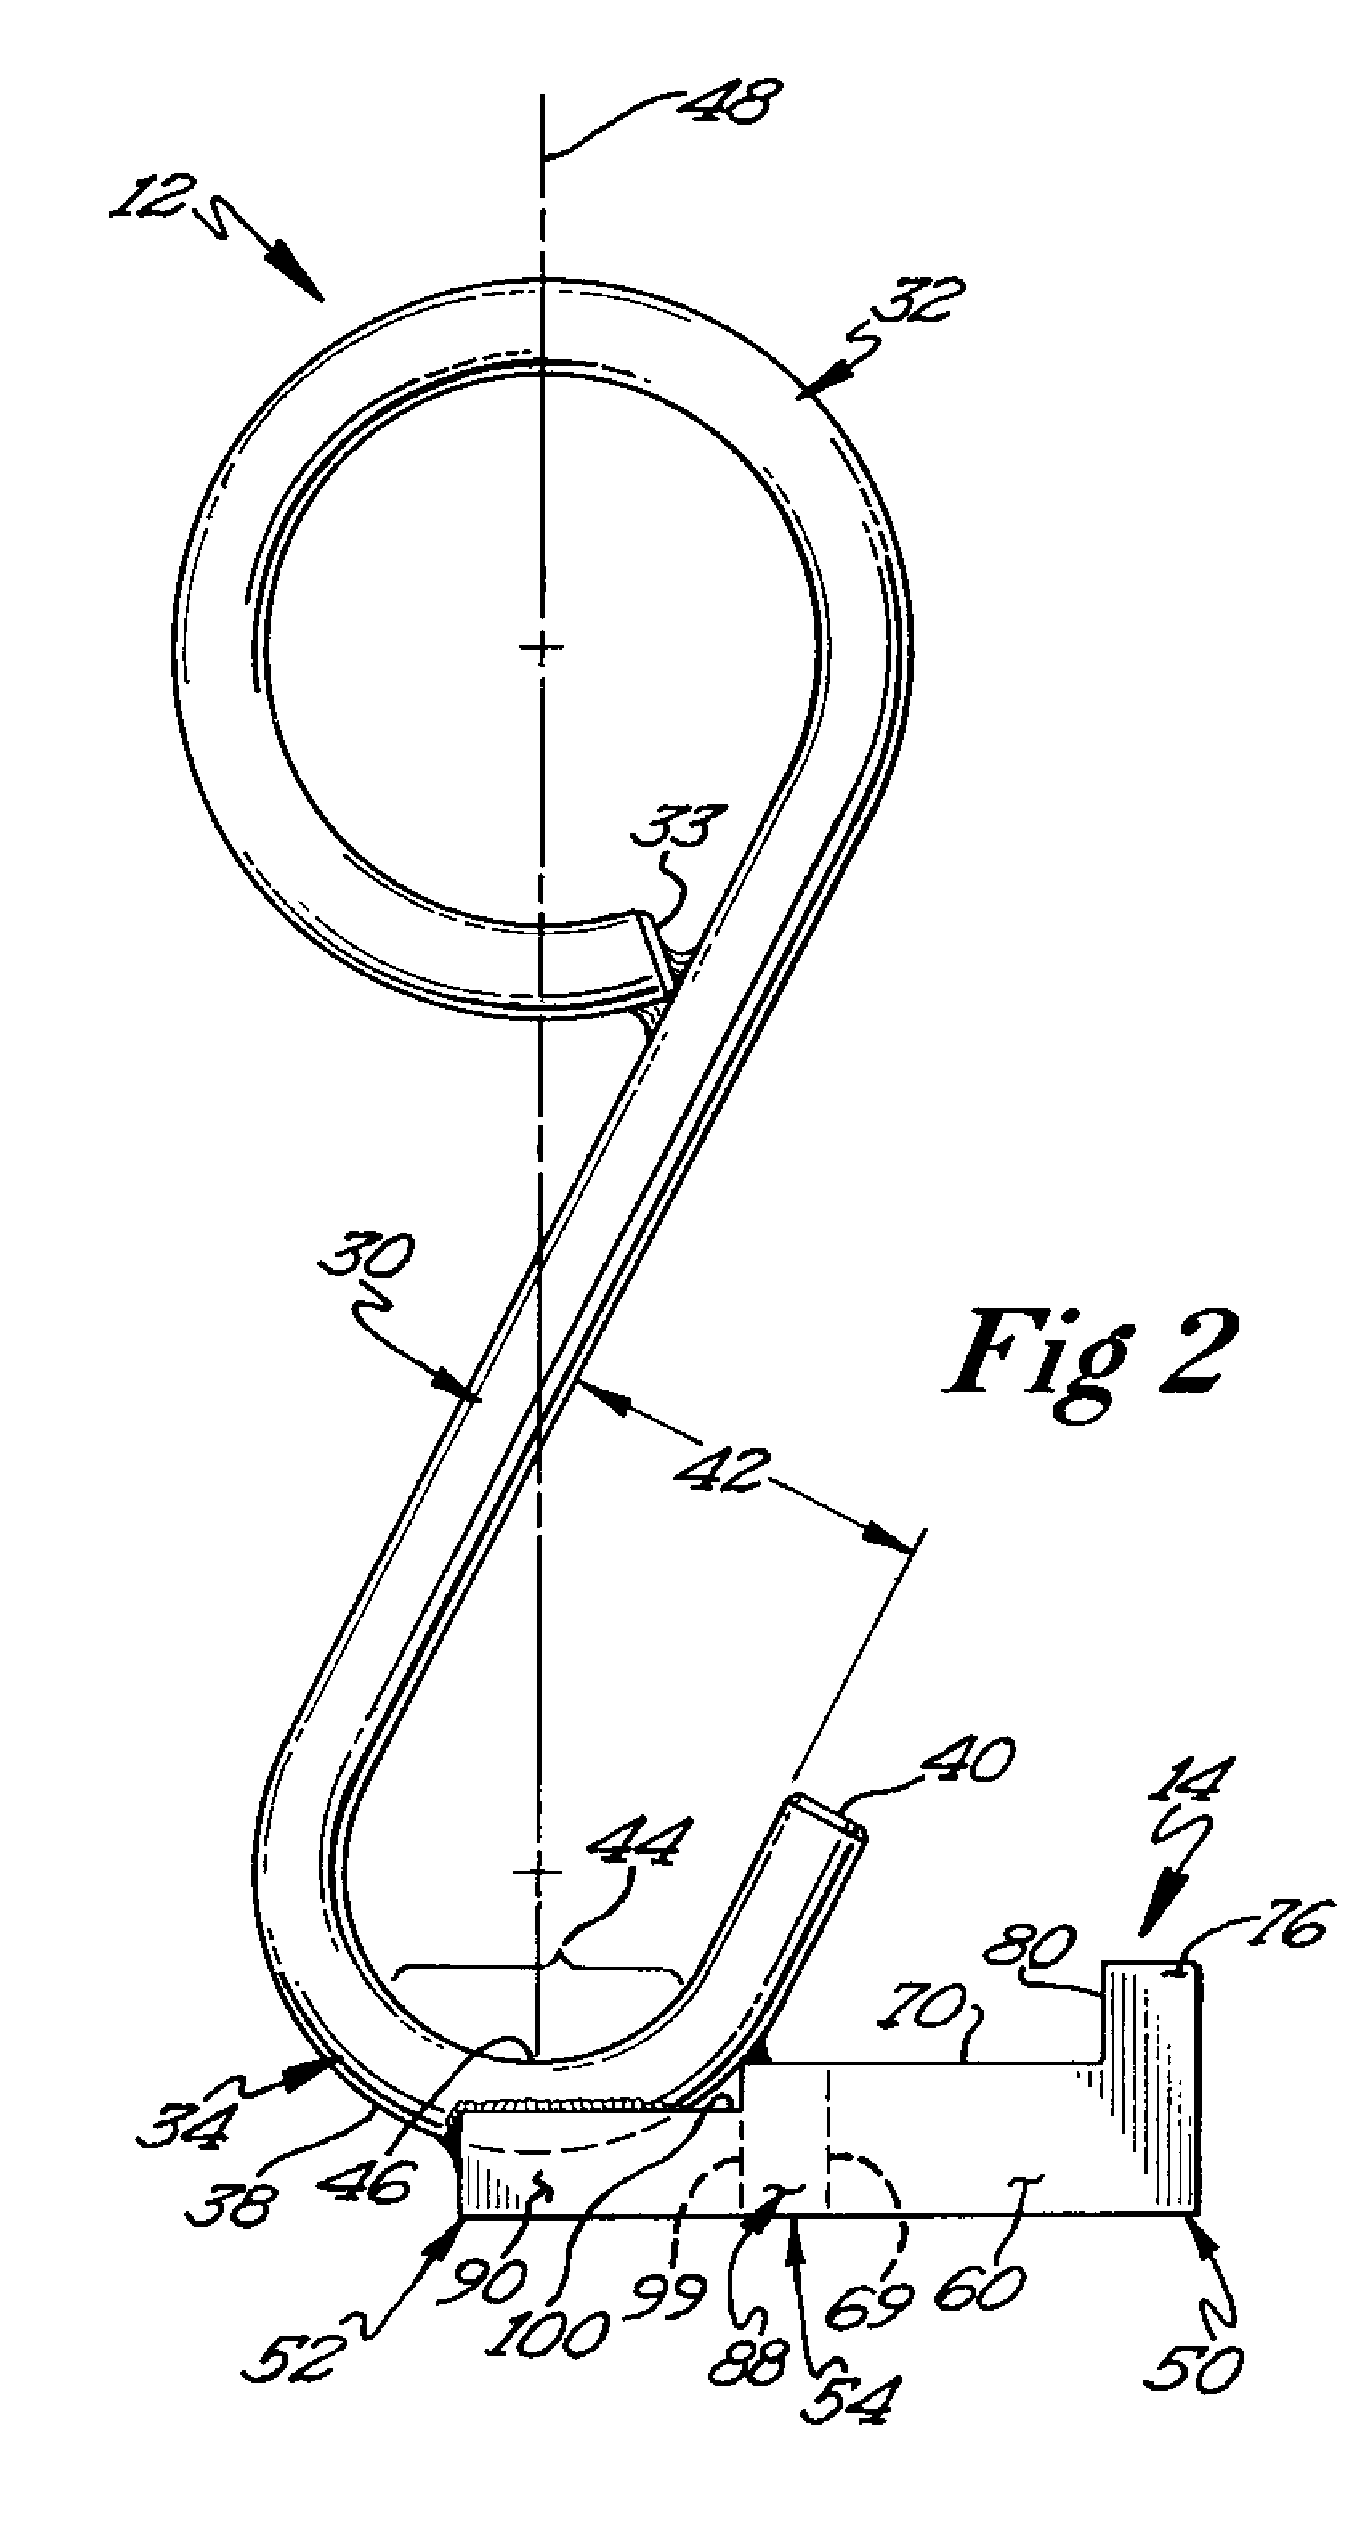 Hook for detection of chain sling failure